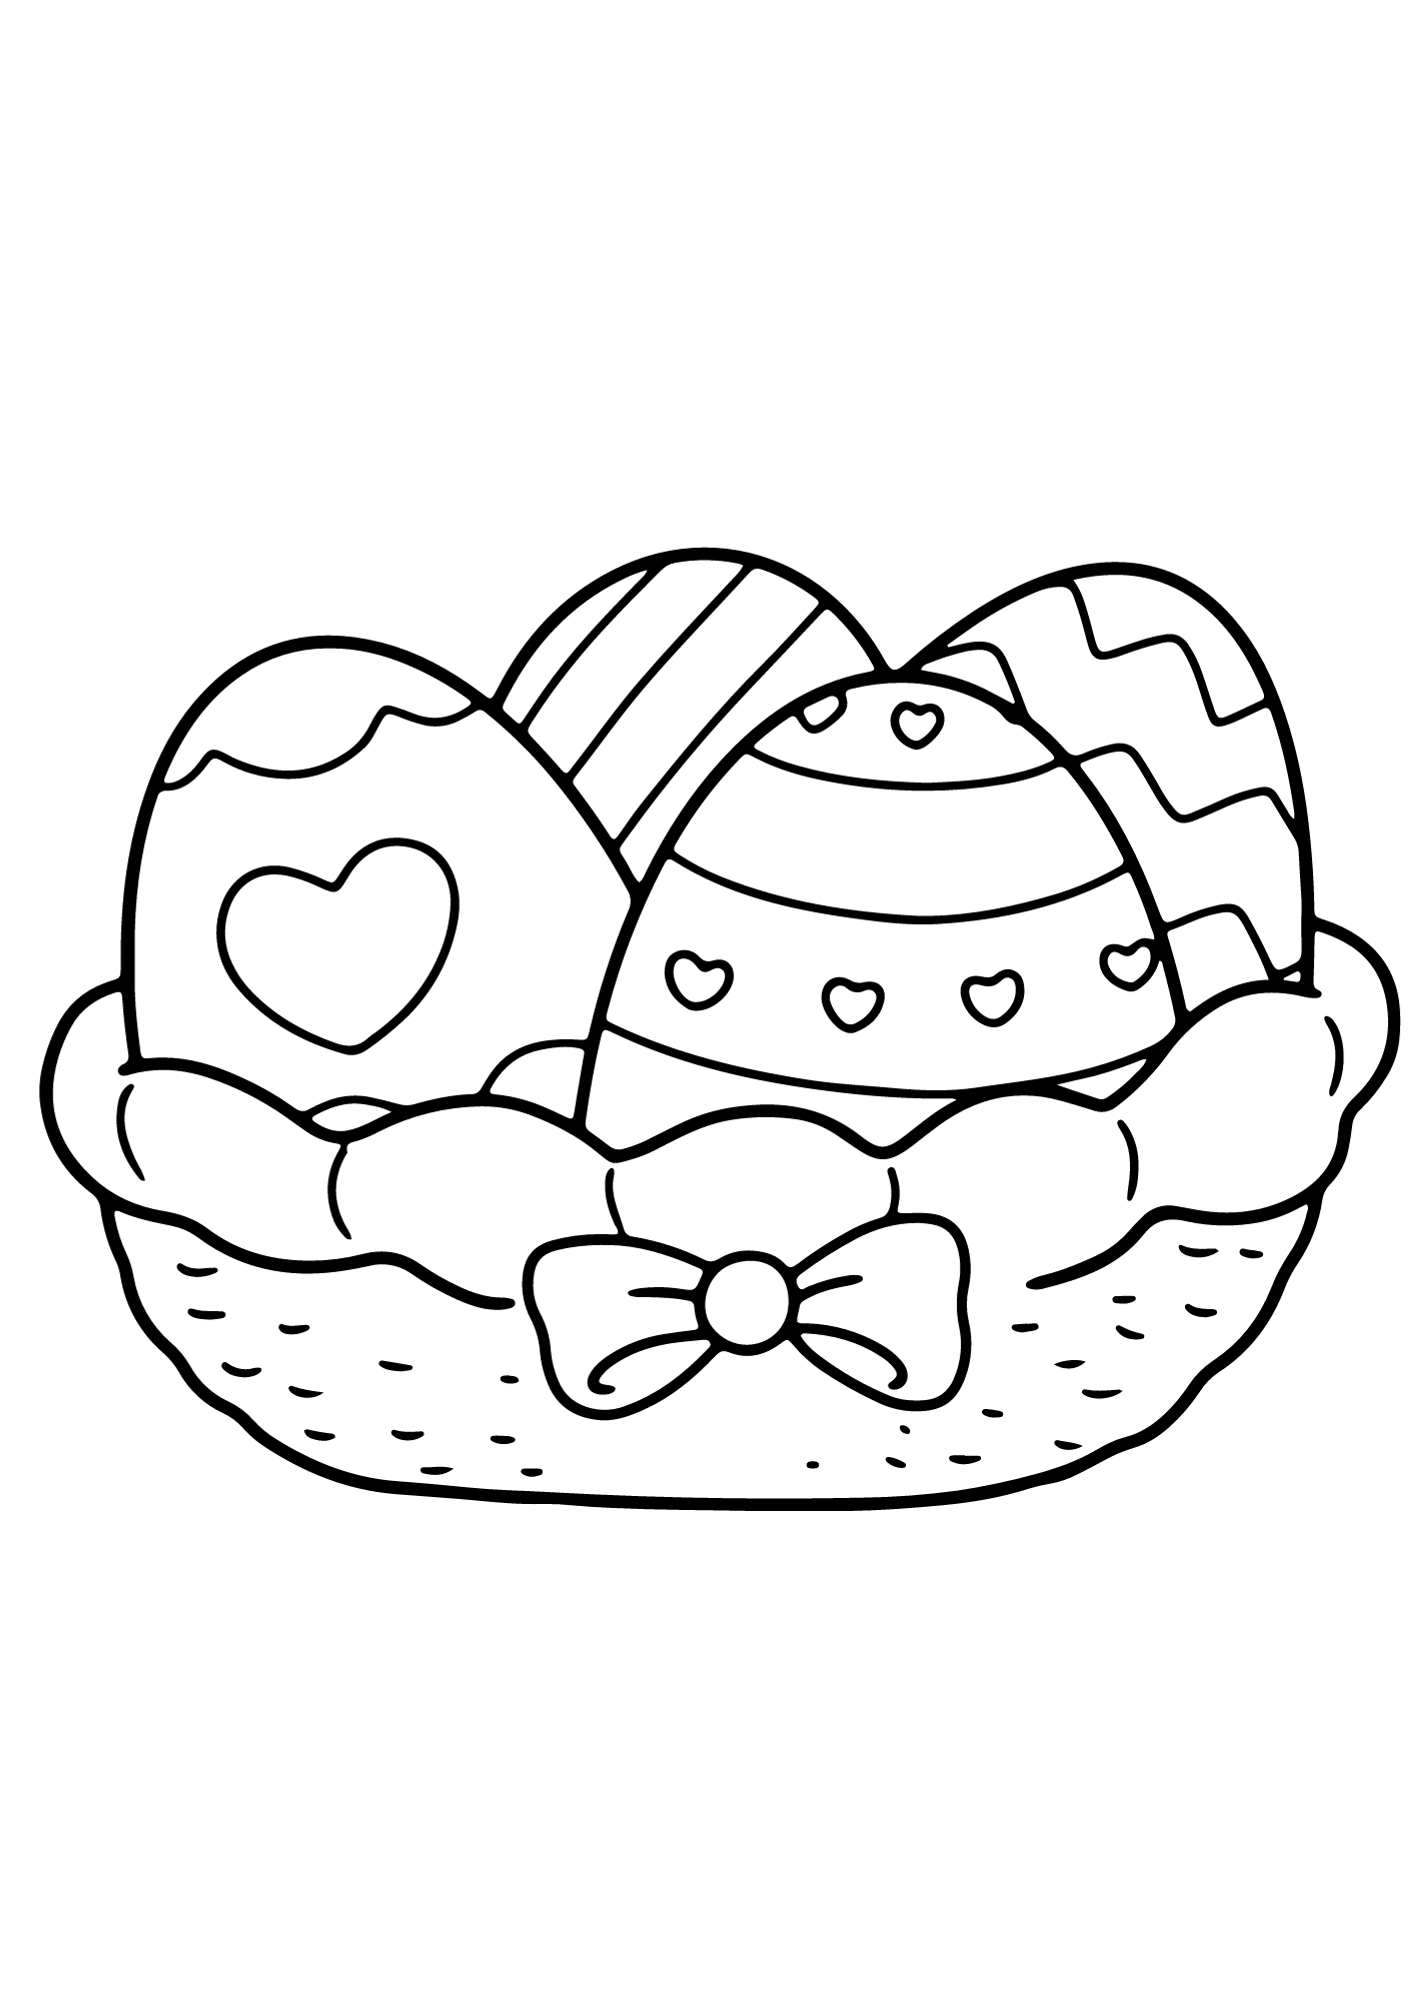 Lovely Easter Egg Coloring Page